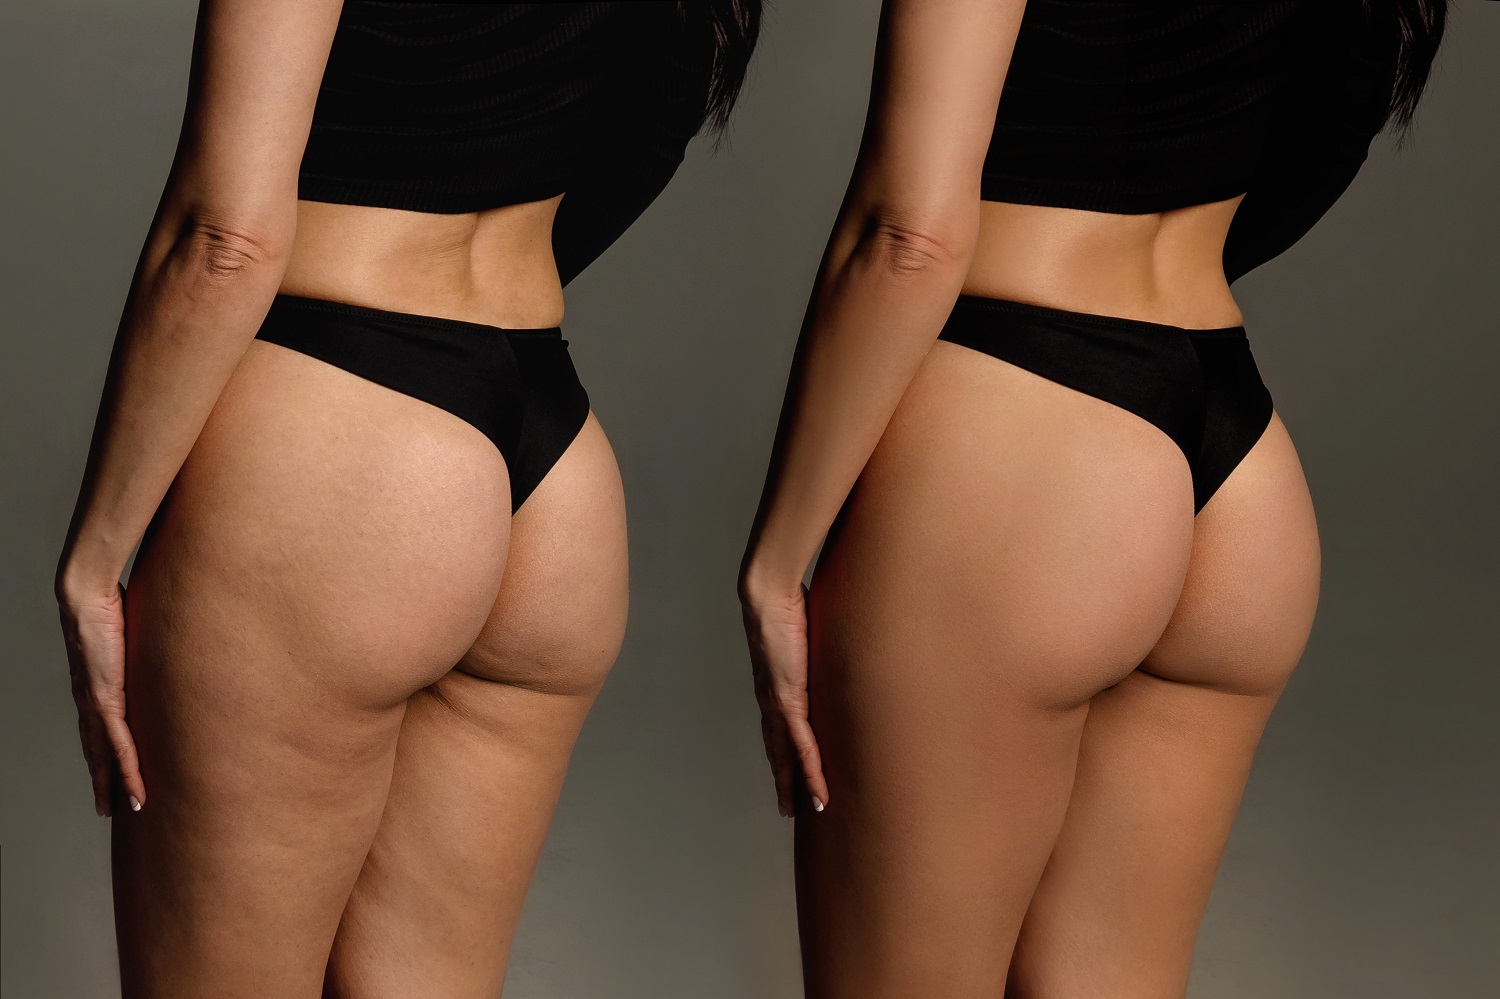 before and after liposuction procedure and cosmetic therapy | Aspen Prime Med Spa in Hoboken, NJ